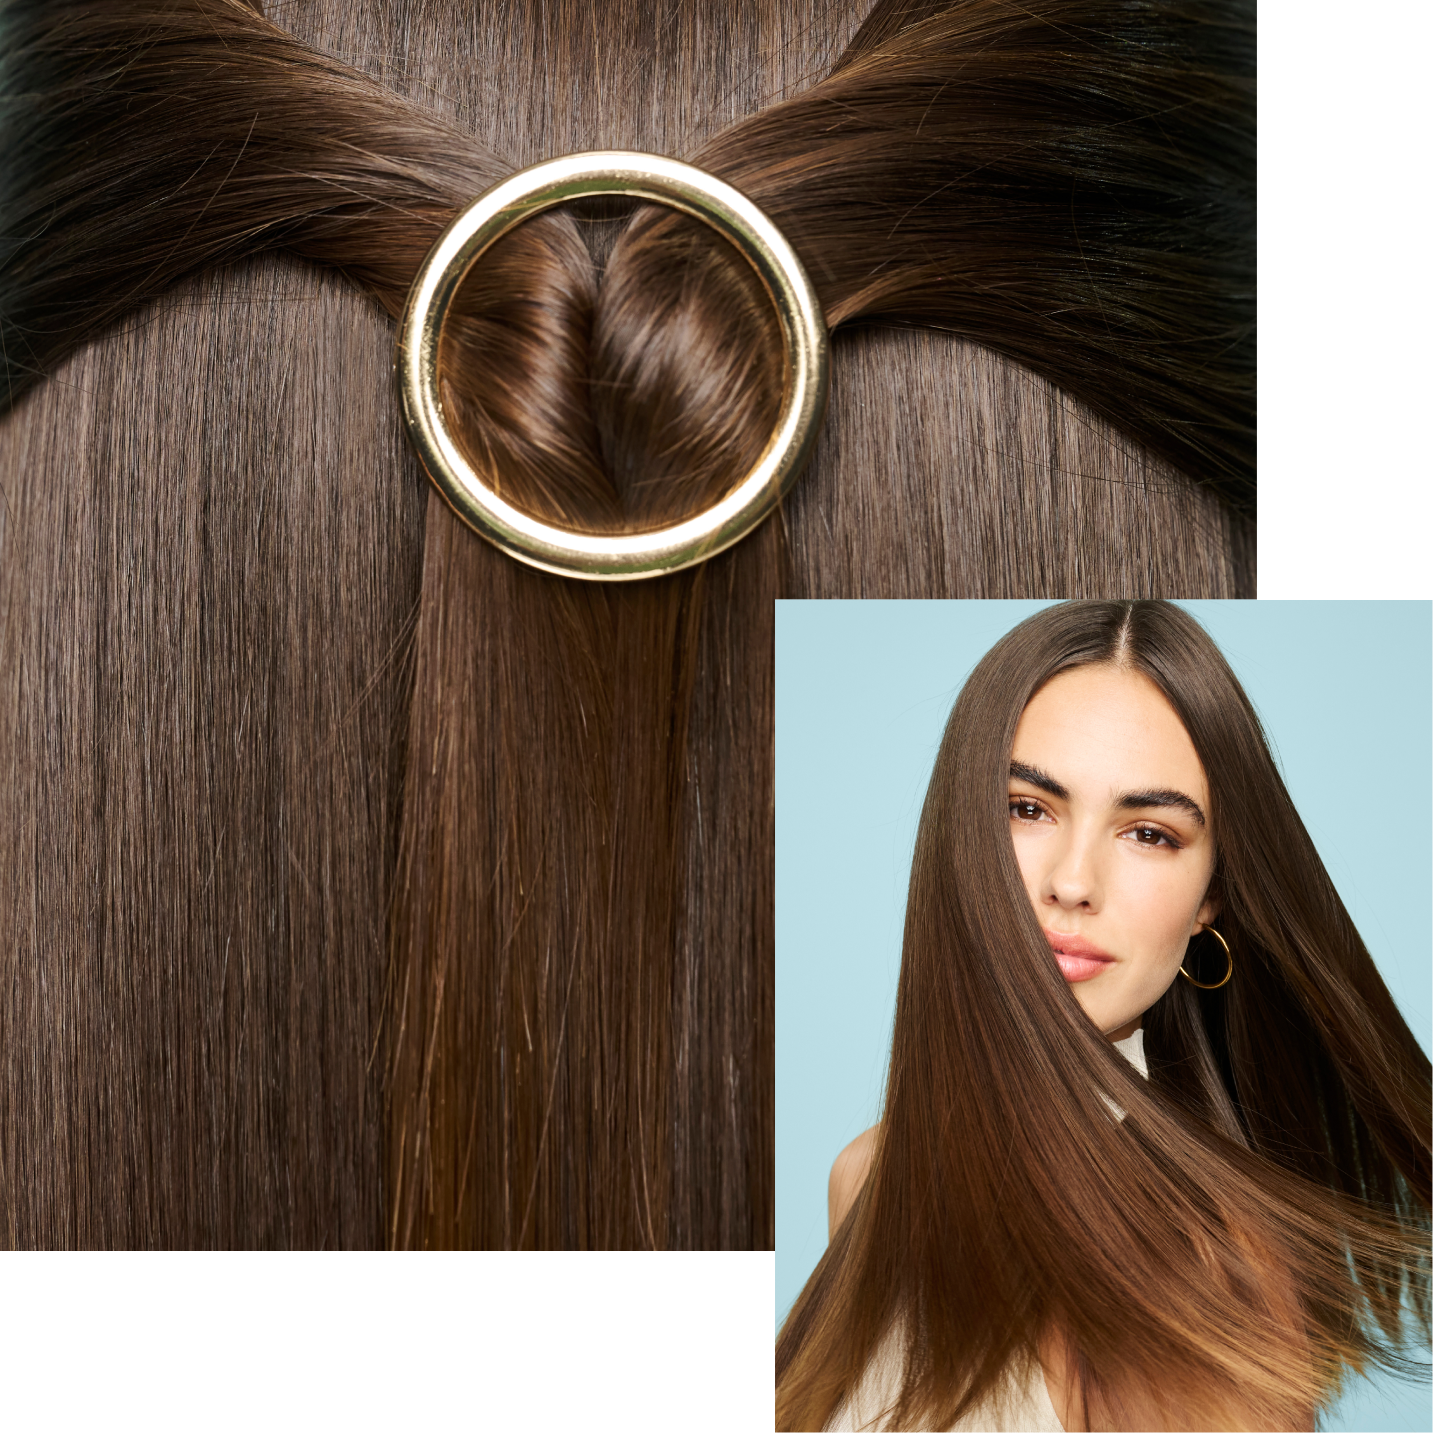 A collage of photos, one of which has hair tied in a ring, and the other photo features a model with her hair waving around.